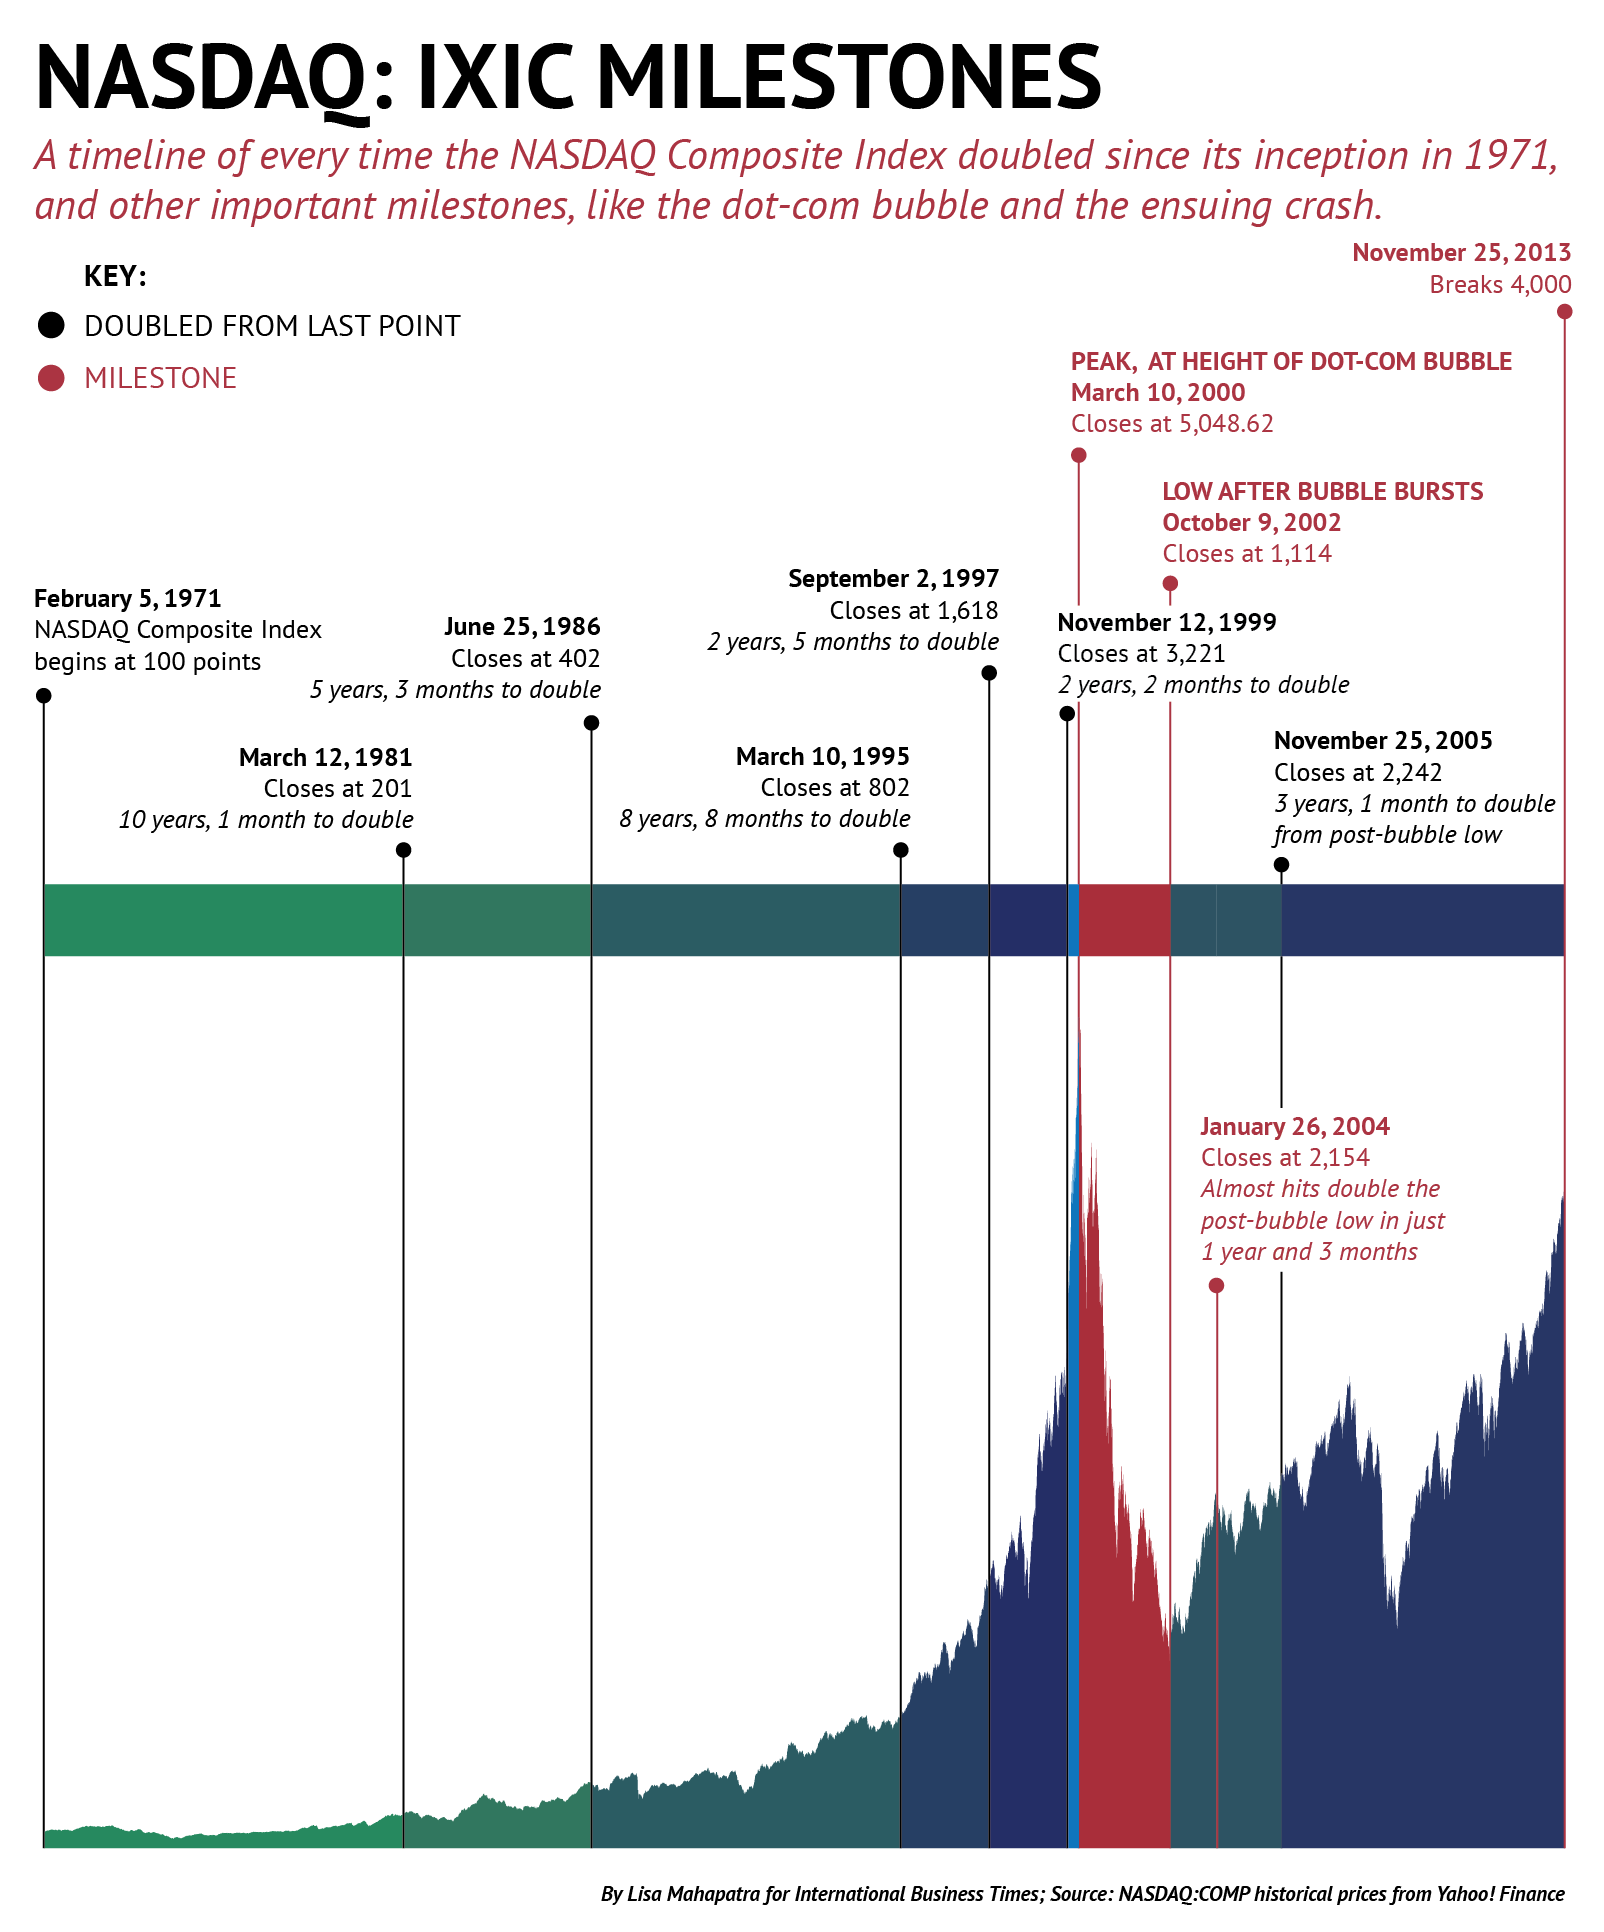 NASDAQ Broke 4,000 Today Here’s A Timeline Of Every Time The Index Has